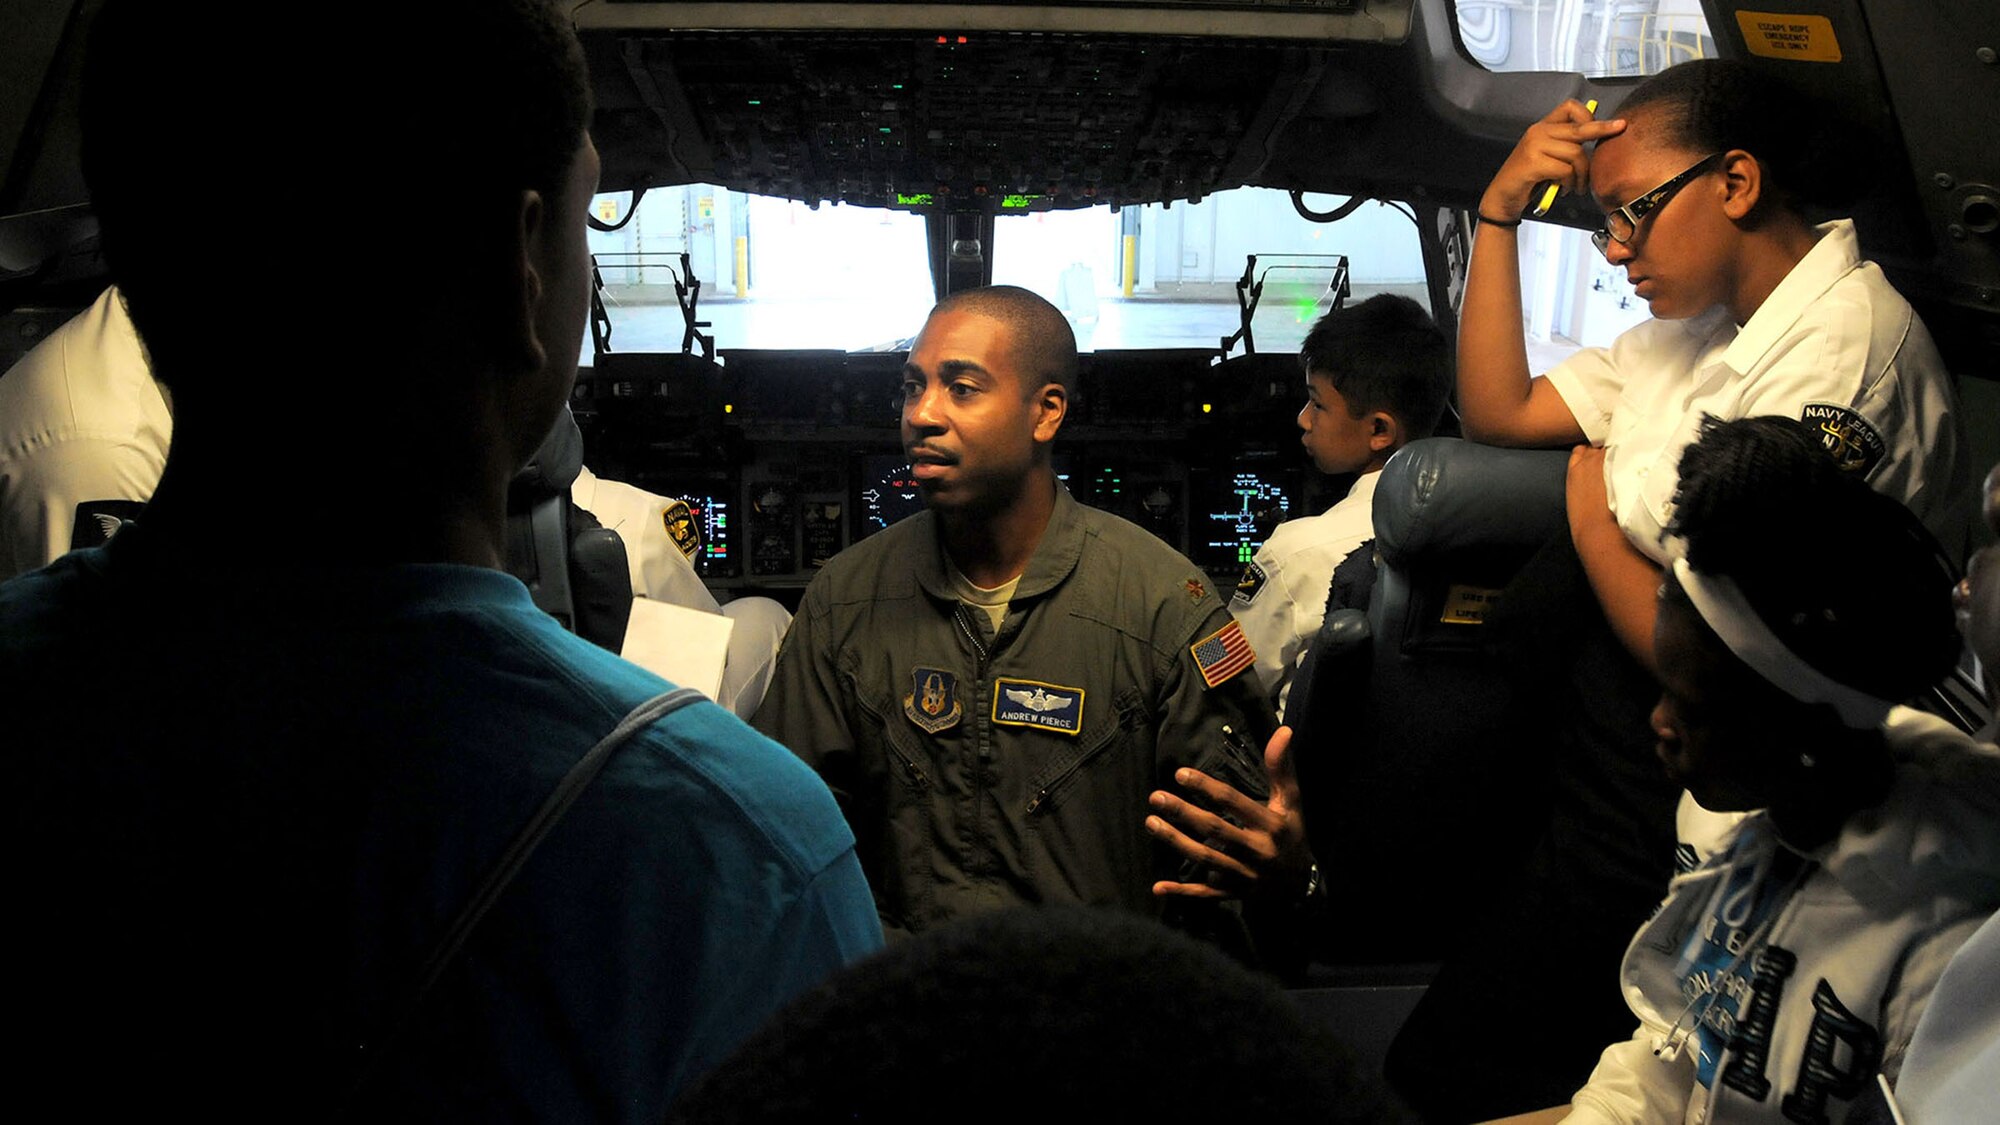 Maj. Andrew Pierce, 89th Airlift Squadron C-17 pilot, shows Dream Flight participants the flightdeck area of a C-17 Globemaster III during the group’s visit to the 445th Airlift Wing July 22, 2015. More than 180 students ages 14-18 and their chaperons visited the wing as part of the 16th Annual Delta Airlines sponsored Dream Flight program. (U.S. Air Force photo/Tech. Sgt. Anthony Springer)
